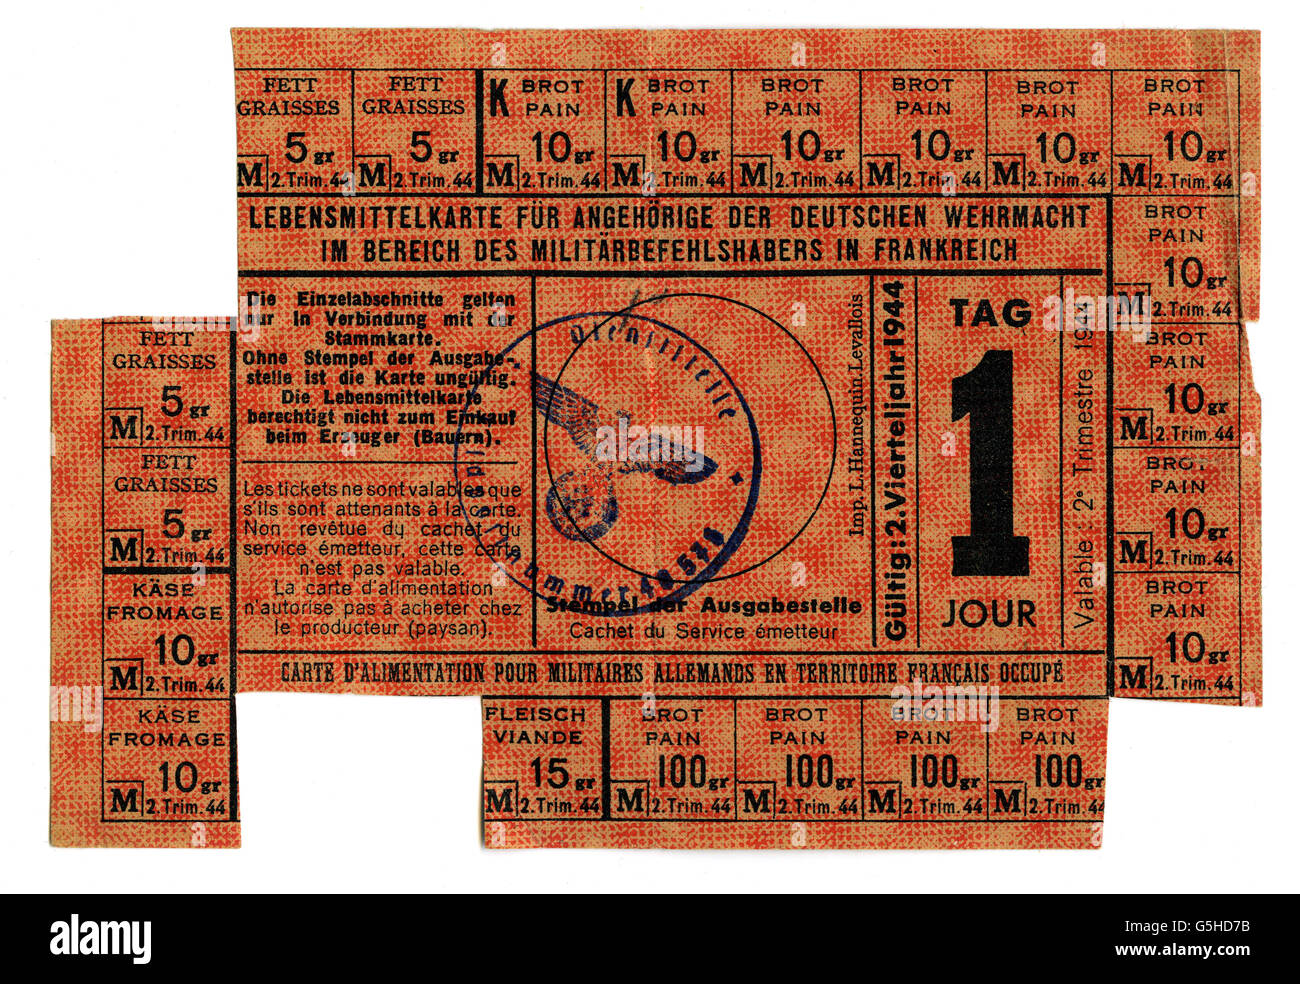 events, Second World War / WWII, France, German occupation, ration card for German army personnel stationed in occupied France, 1944, Additional-Rights-Clearences-Not Available Stock Photo